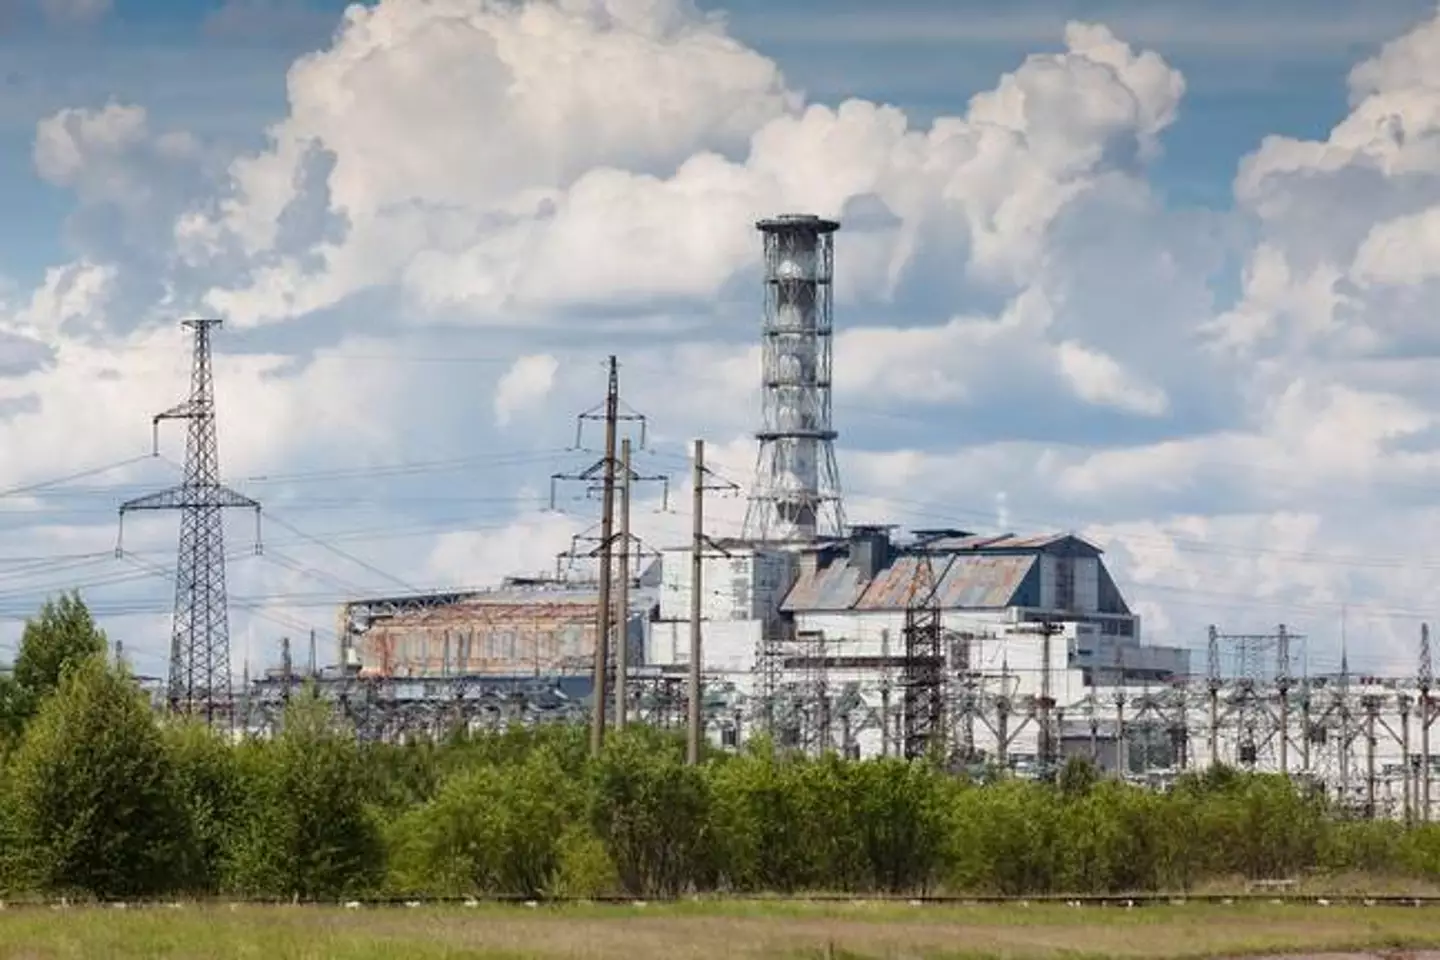 Russian troops took over Chernobyl Nuclear Power Plant.